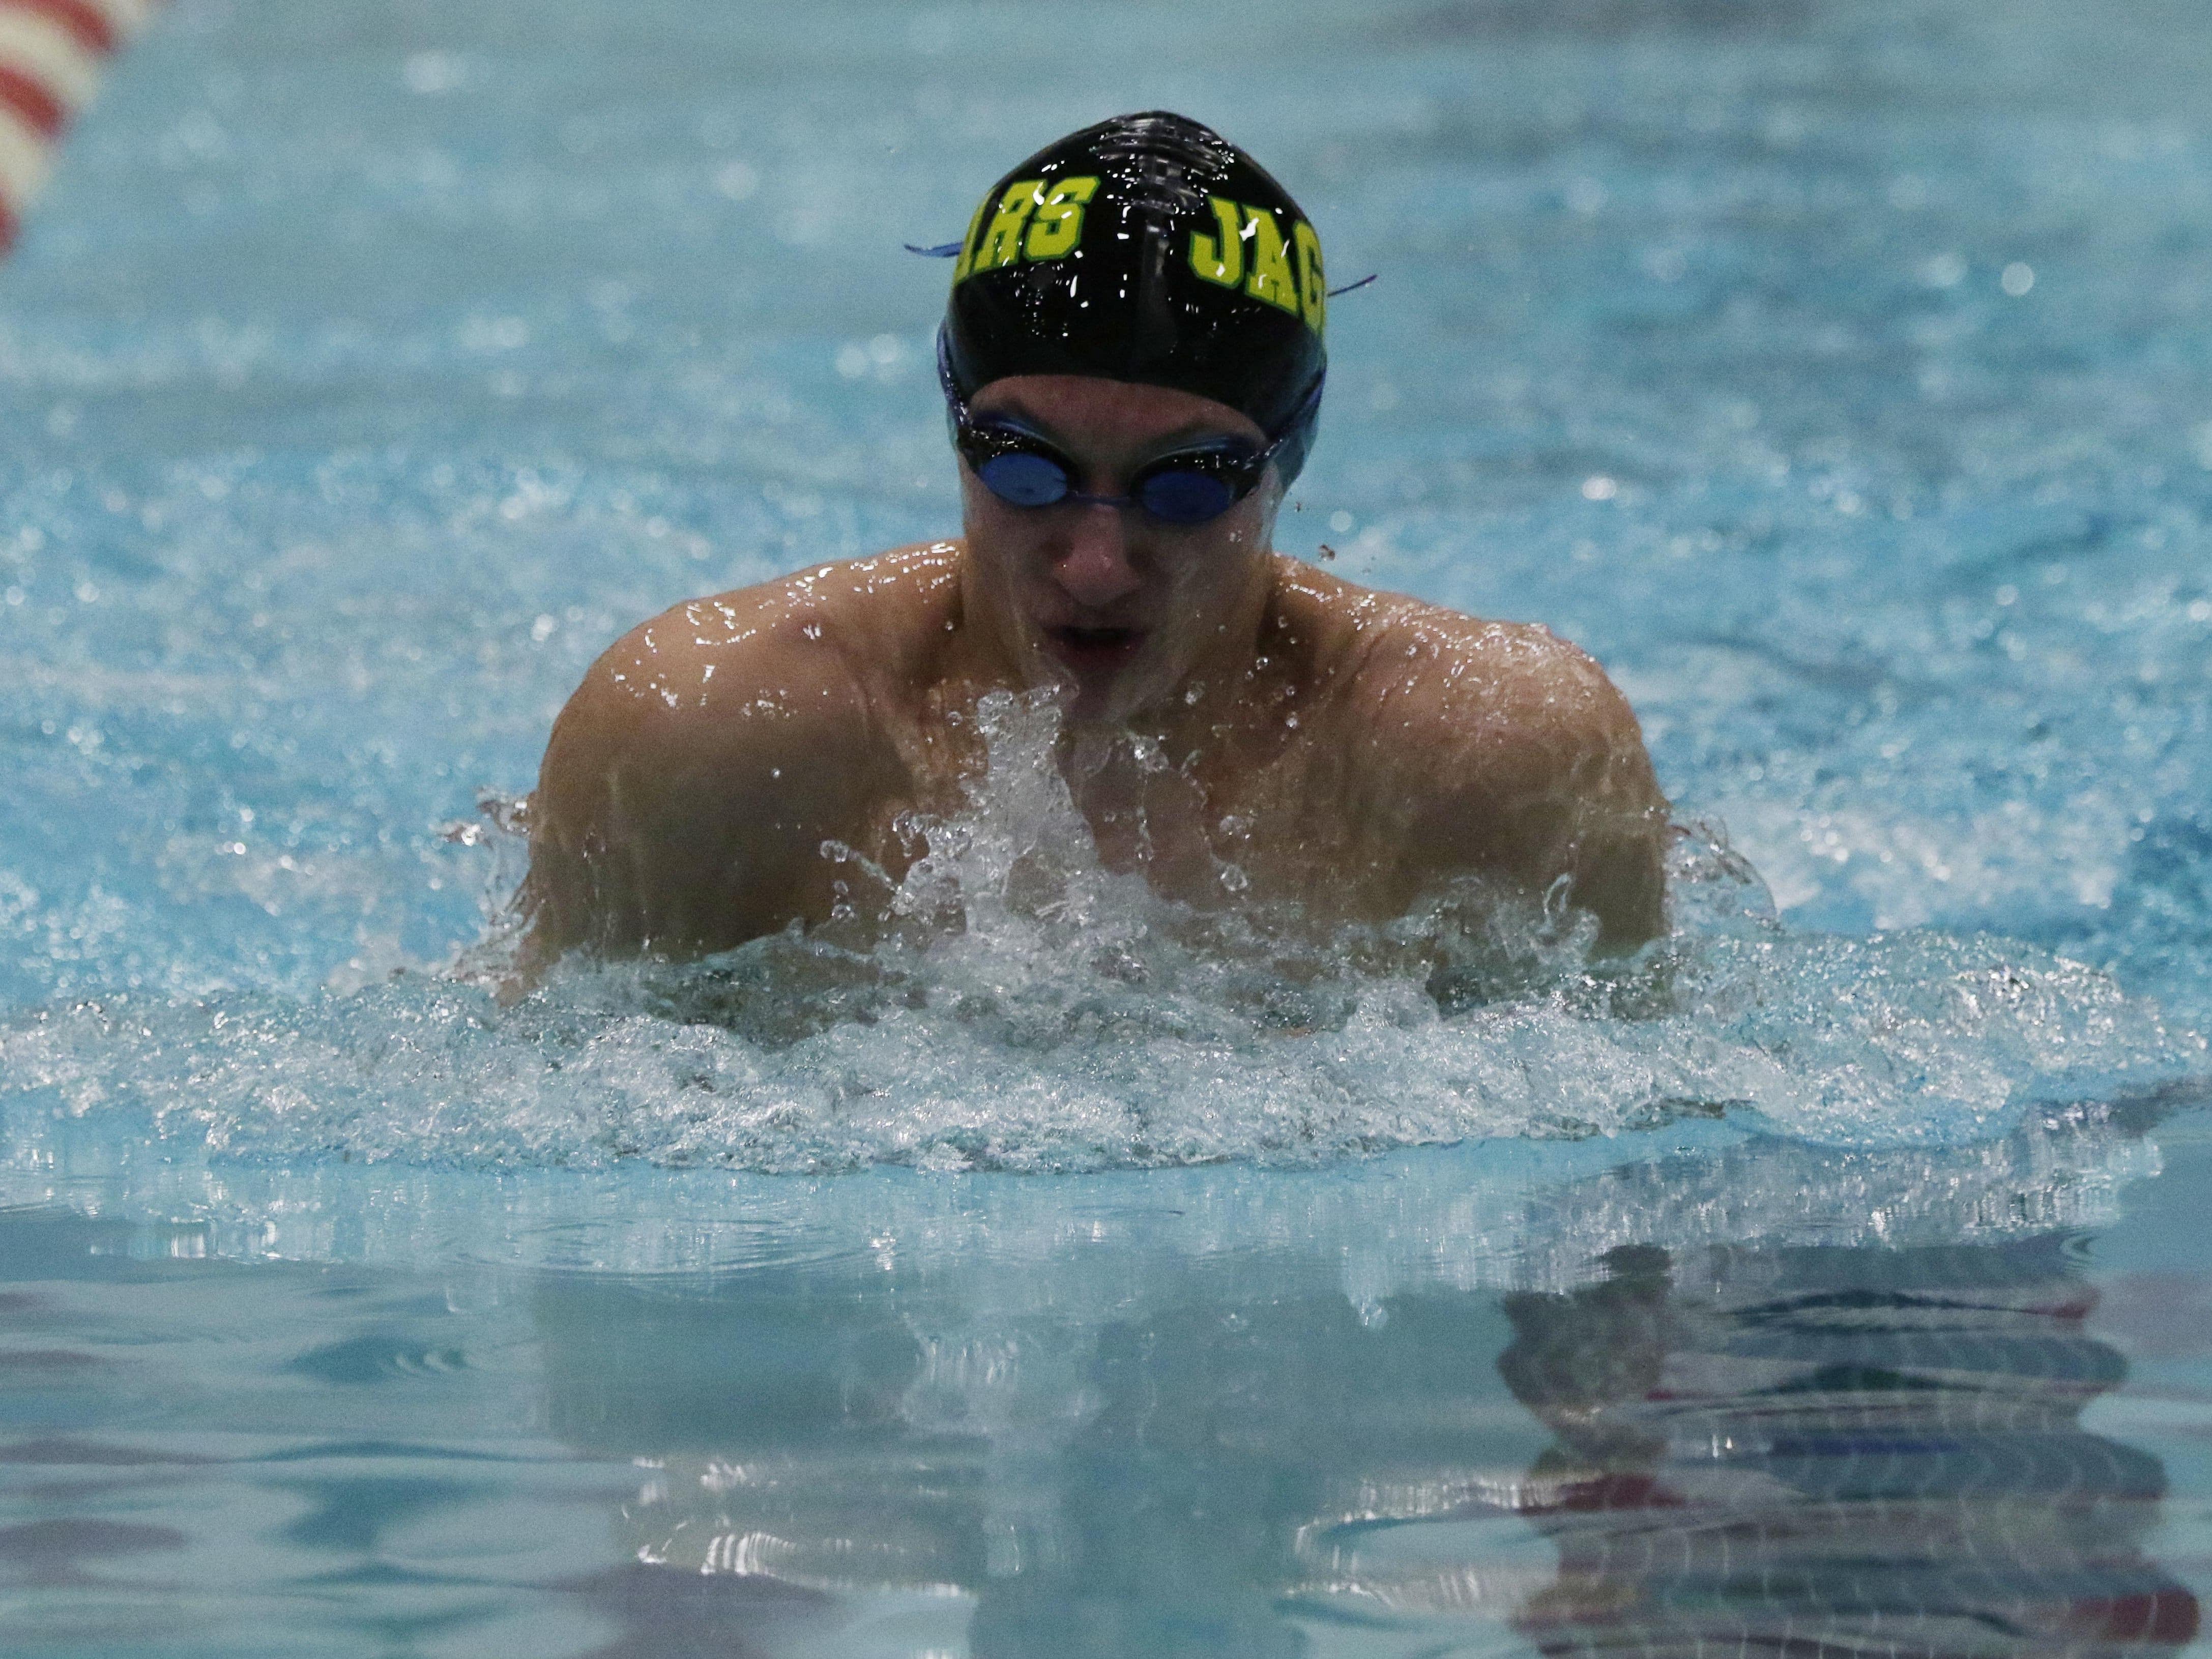 Ashwaubenon senior Daniel Jablonski swims the 100-yard breaststroke during the WIAA Division 2 state boys swimming and diving championships held at the University of Wisconsin Natatorium on Friday. Jablonski placed fifth to help the Jaguars finished as the D2 state runners-up.